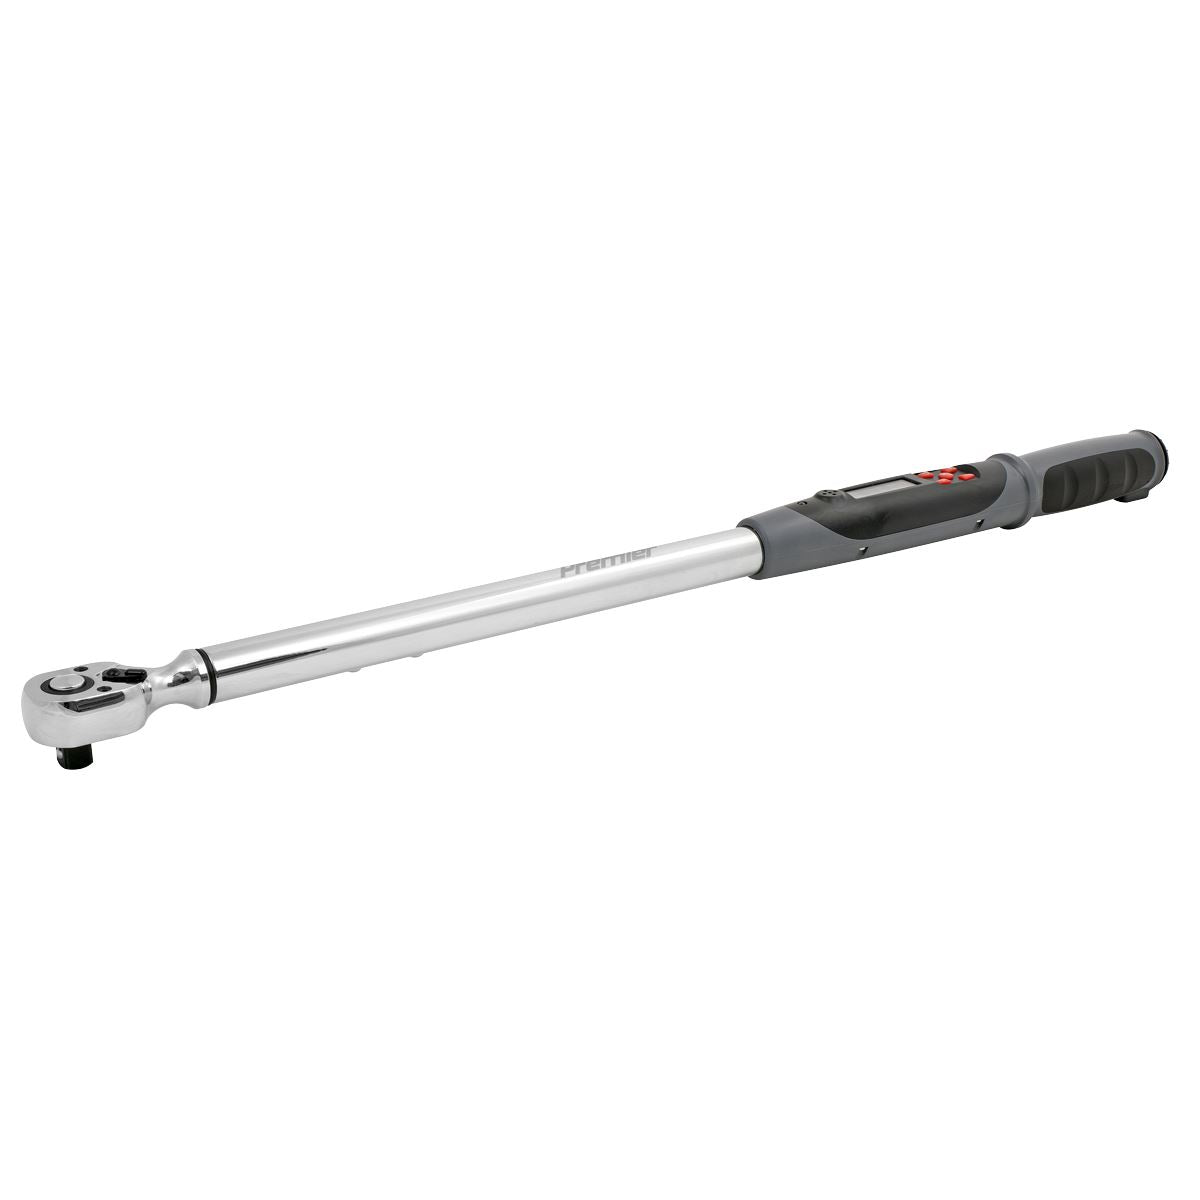 Sealey Premier Angle Torque Wrench Digital 1/2"Sq Drive 30-340Nm (22-250lb.ft)